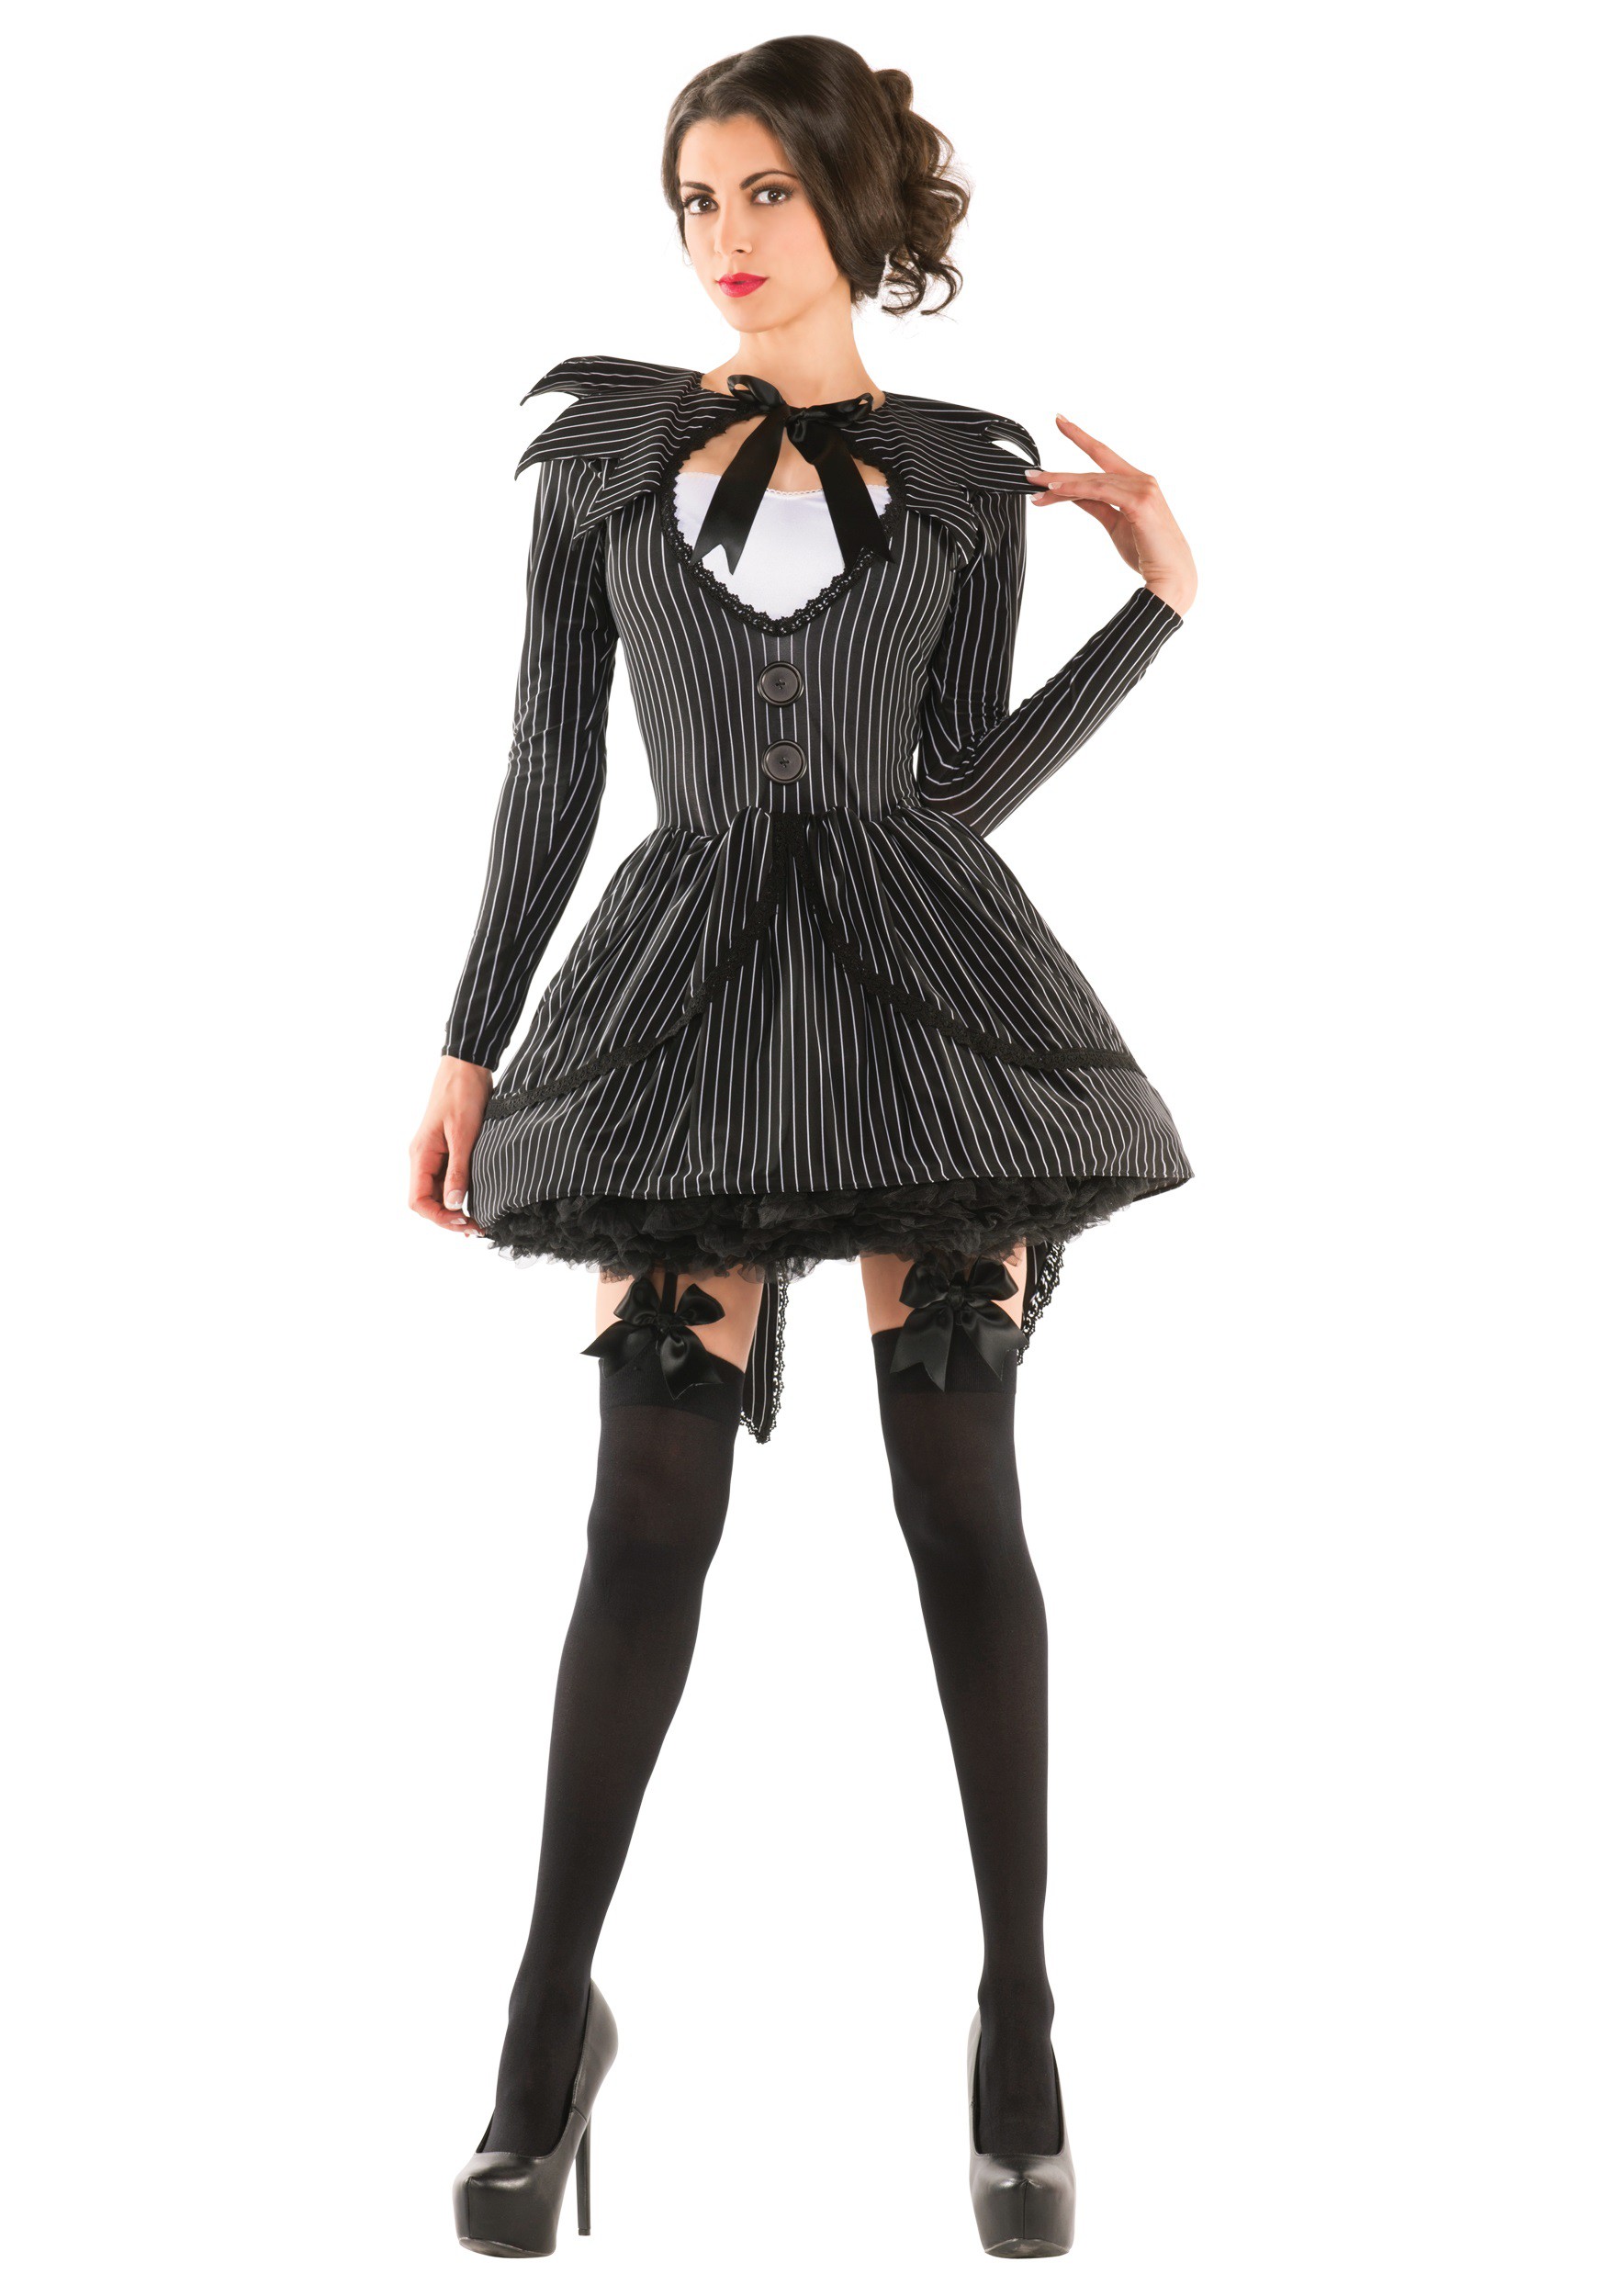 Image of Bad Dreams Babe Adult Costume ID PKPK407-S